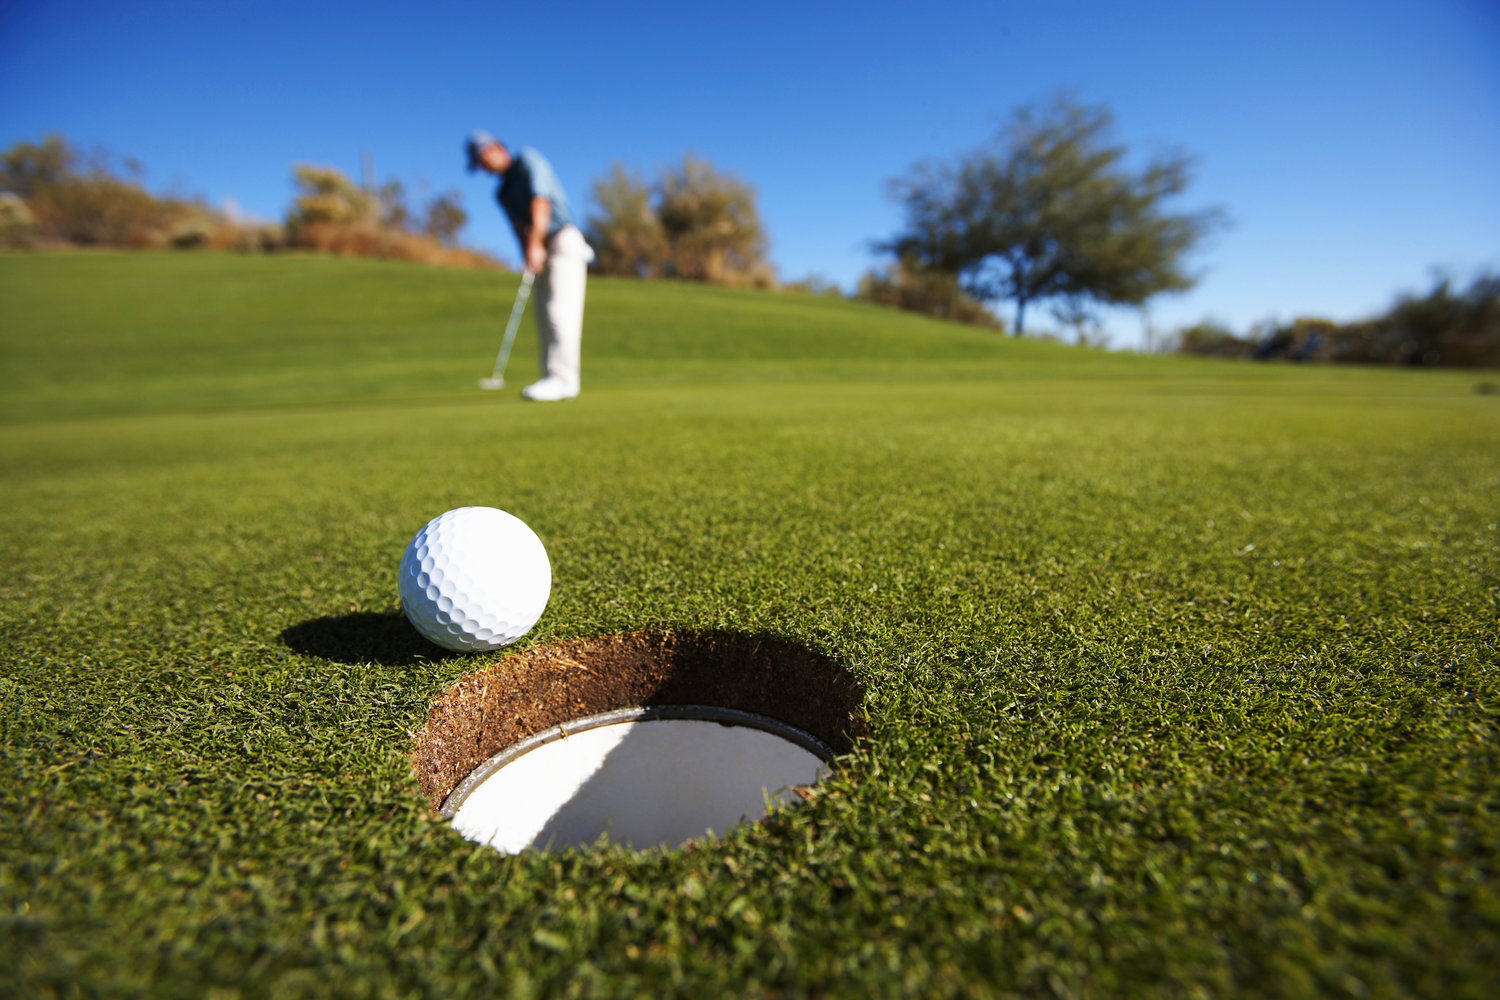 The Arc Herkimer will host an inclusive golf clinic at its MV Golf &amp; Event Center, 6069 Route 5, at 11 a.m. on Monday, Oct. 17. The clinic was made possible through a $4,375 grant from the I GOT THIS Foundation.